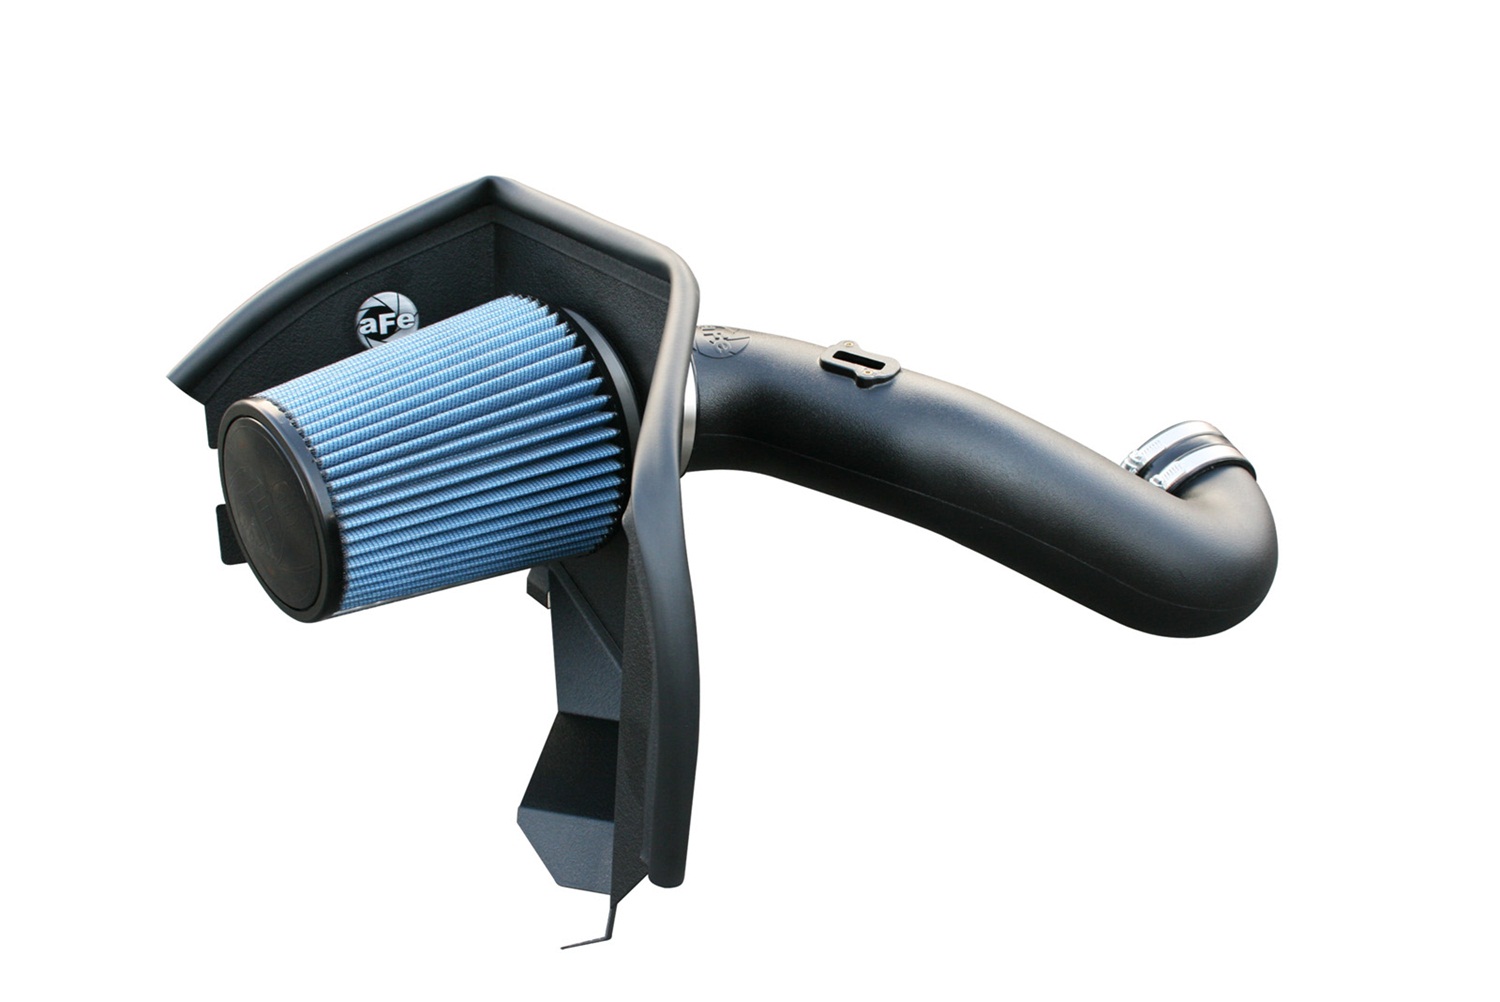 aFe Power aFe Power 54-10942 MagnumFORCE Stage-2 PRO 5R Intake System Fits Sequoia Tundra